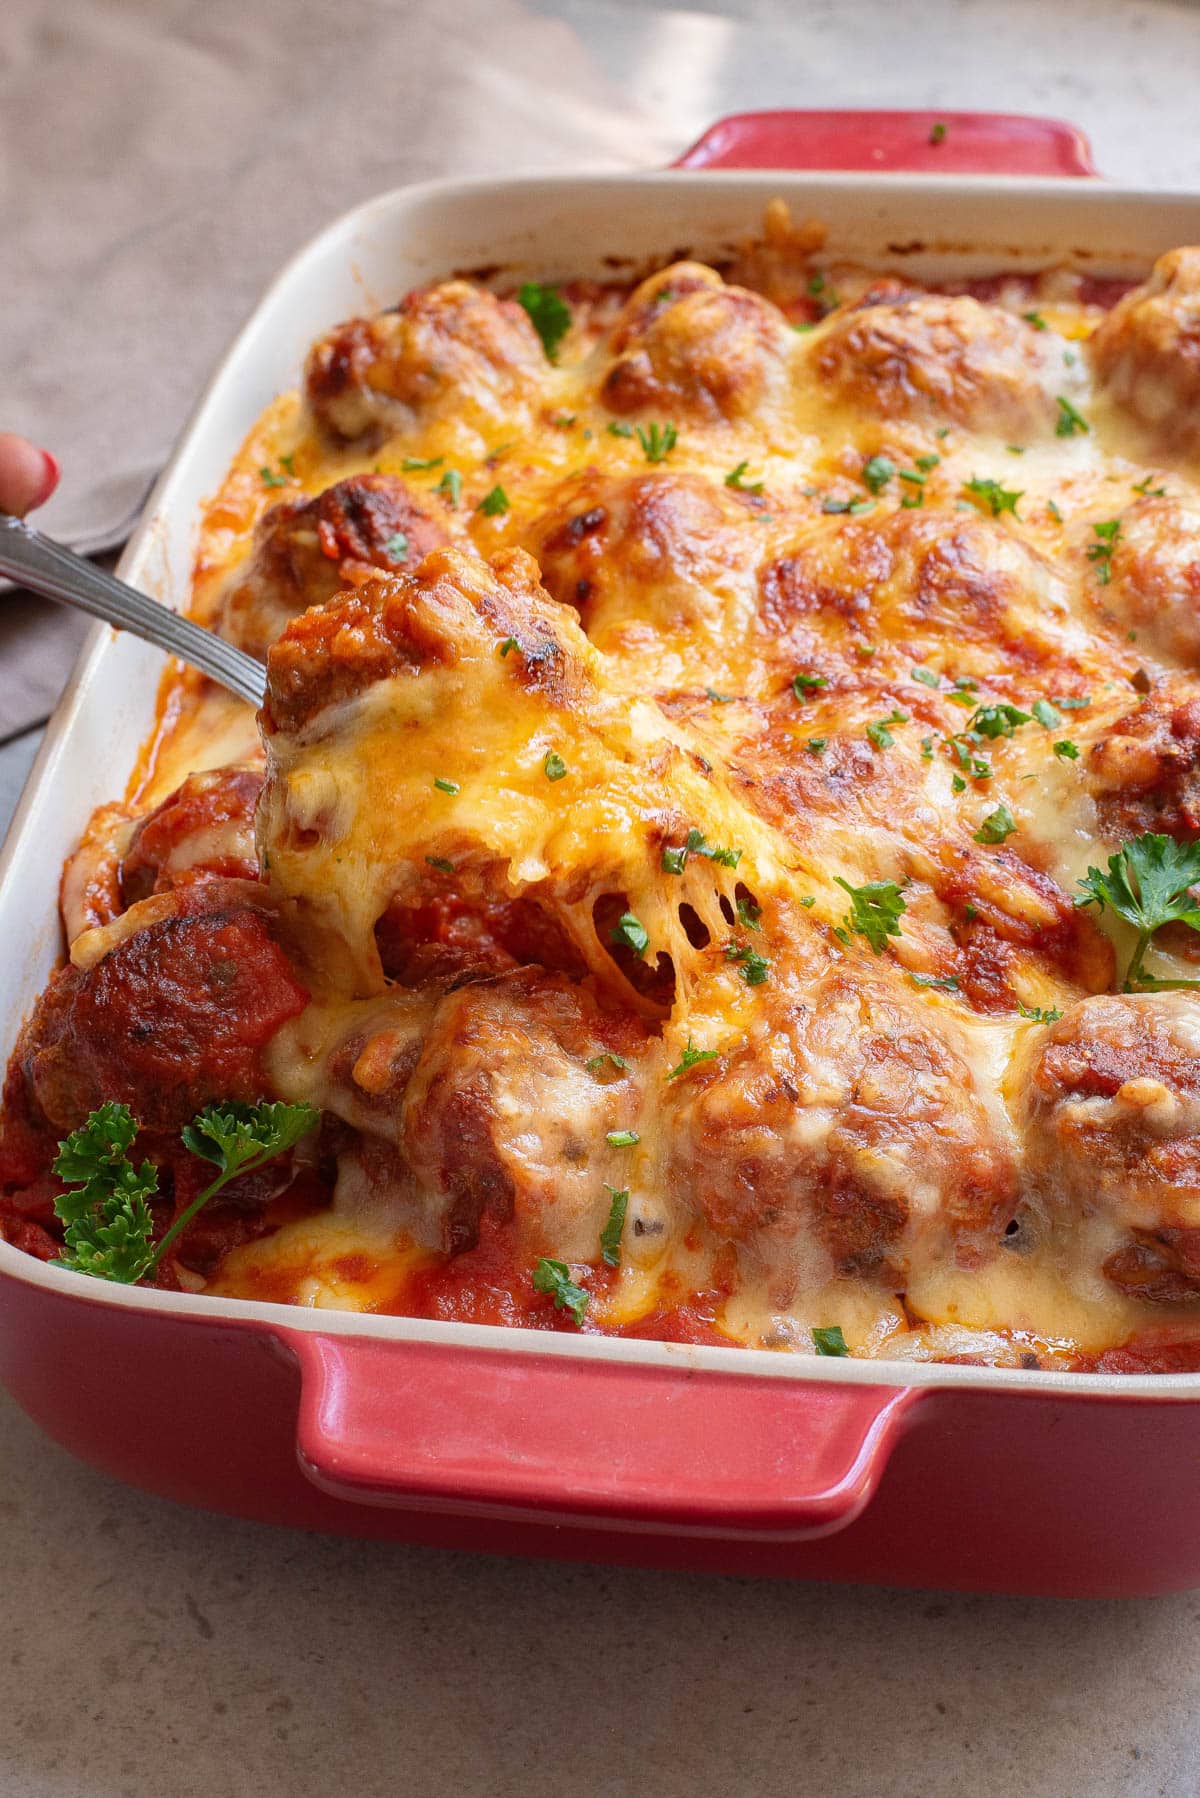 Meatballs in marinara and cheese baked in a casserole dish.